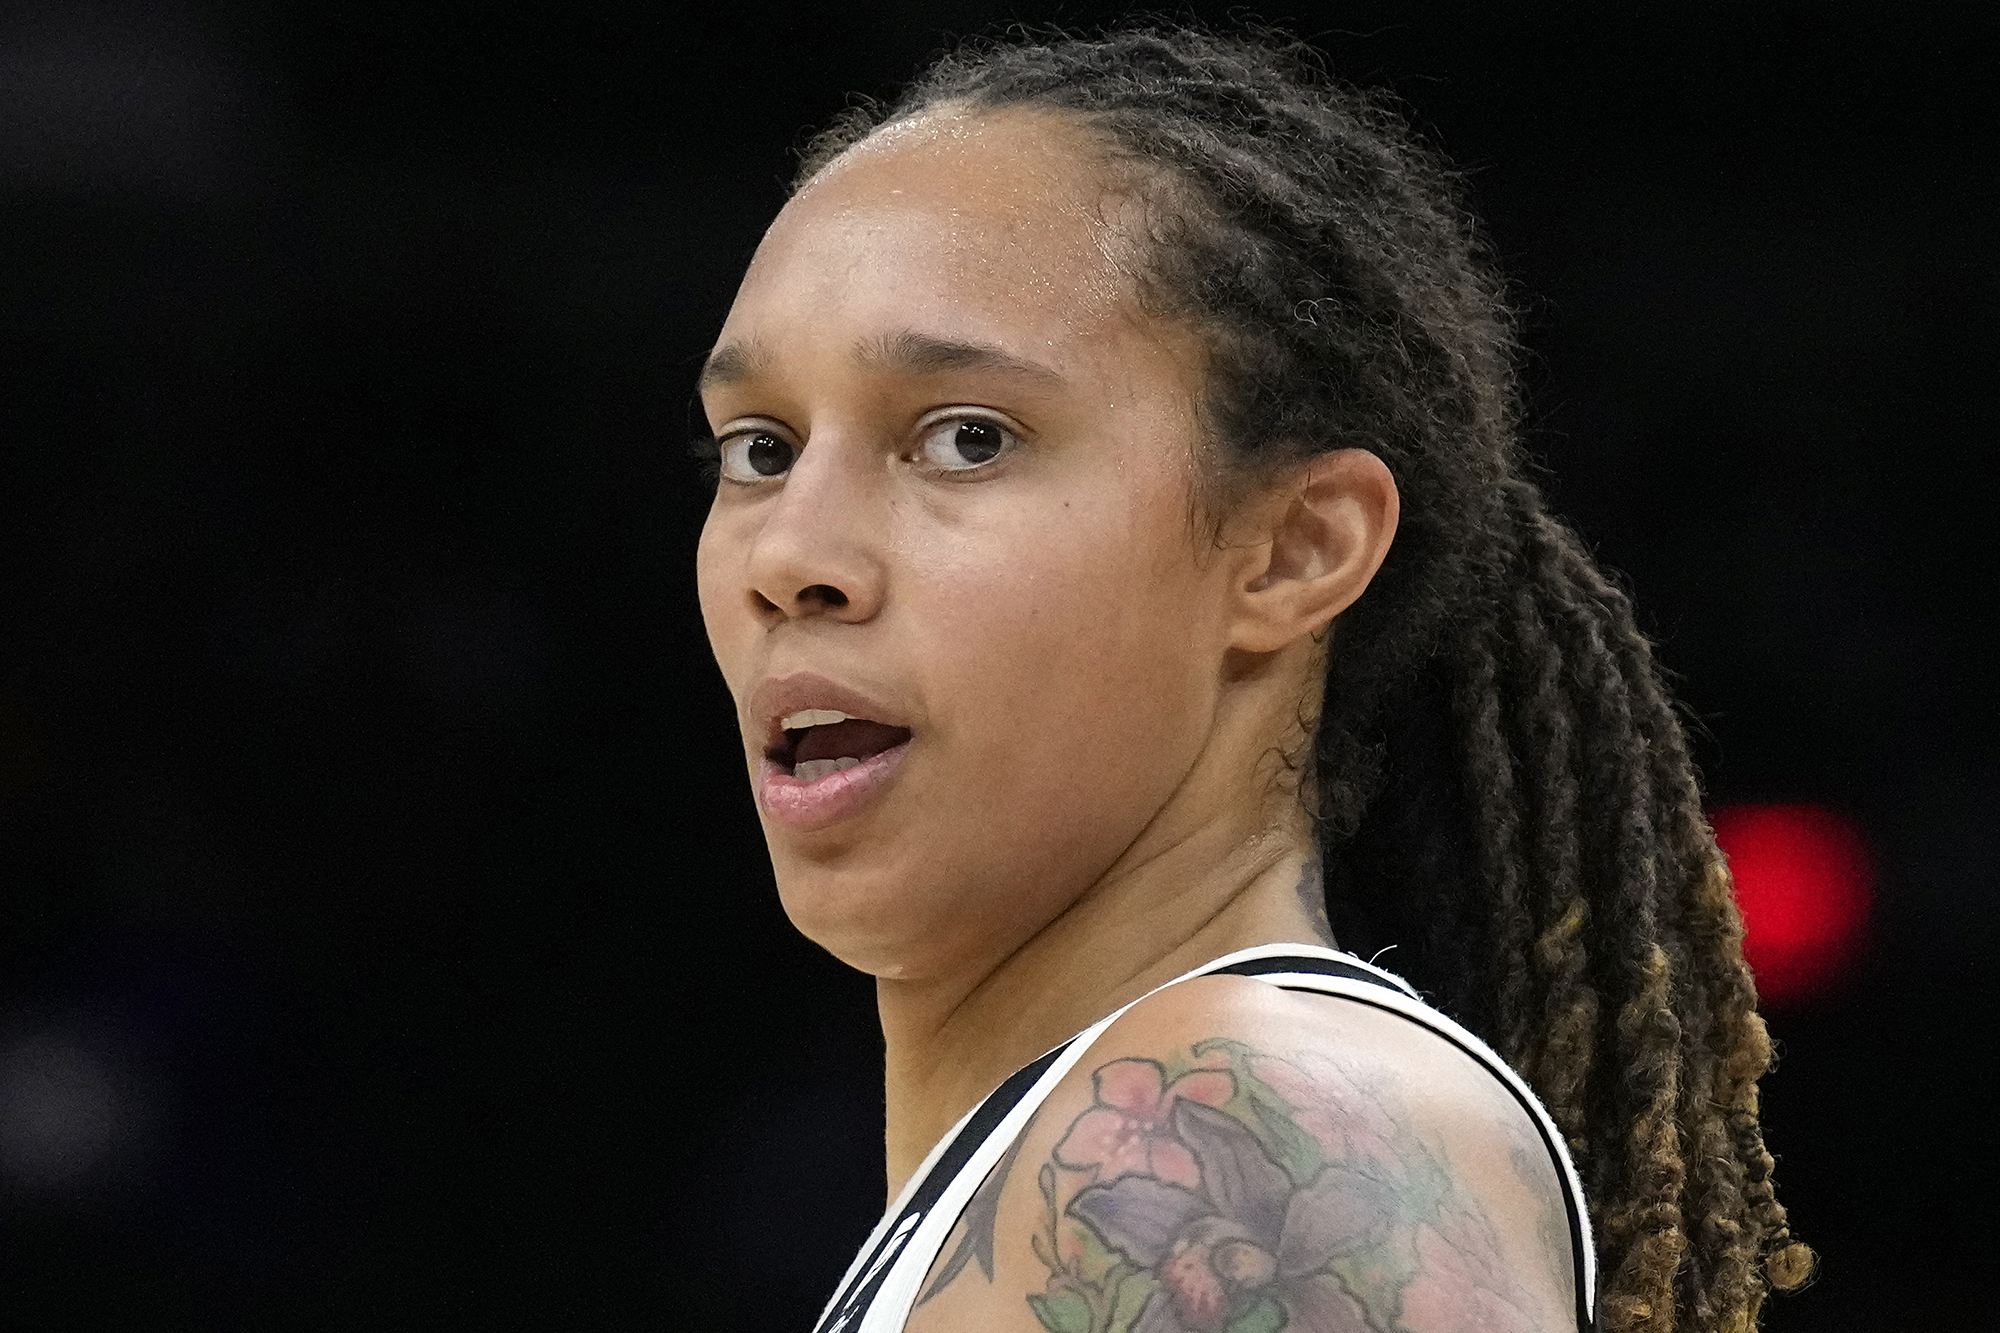 PHOTO: Phoenix Mercury center Brittney Griner during the first half of Game 2 of basketball's WNBA Finals against the Chicago Sky, Oct. 13, 2021, in Phoenix.